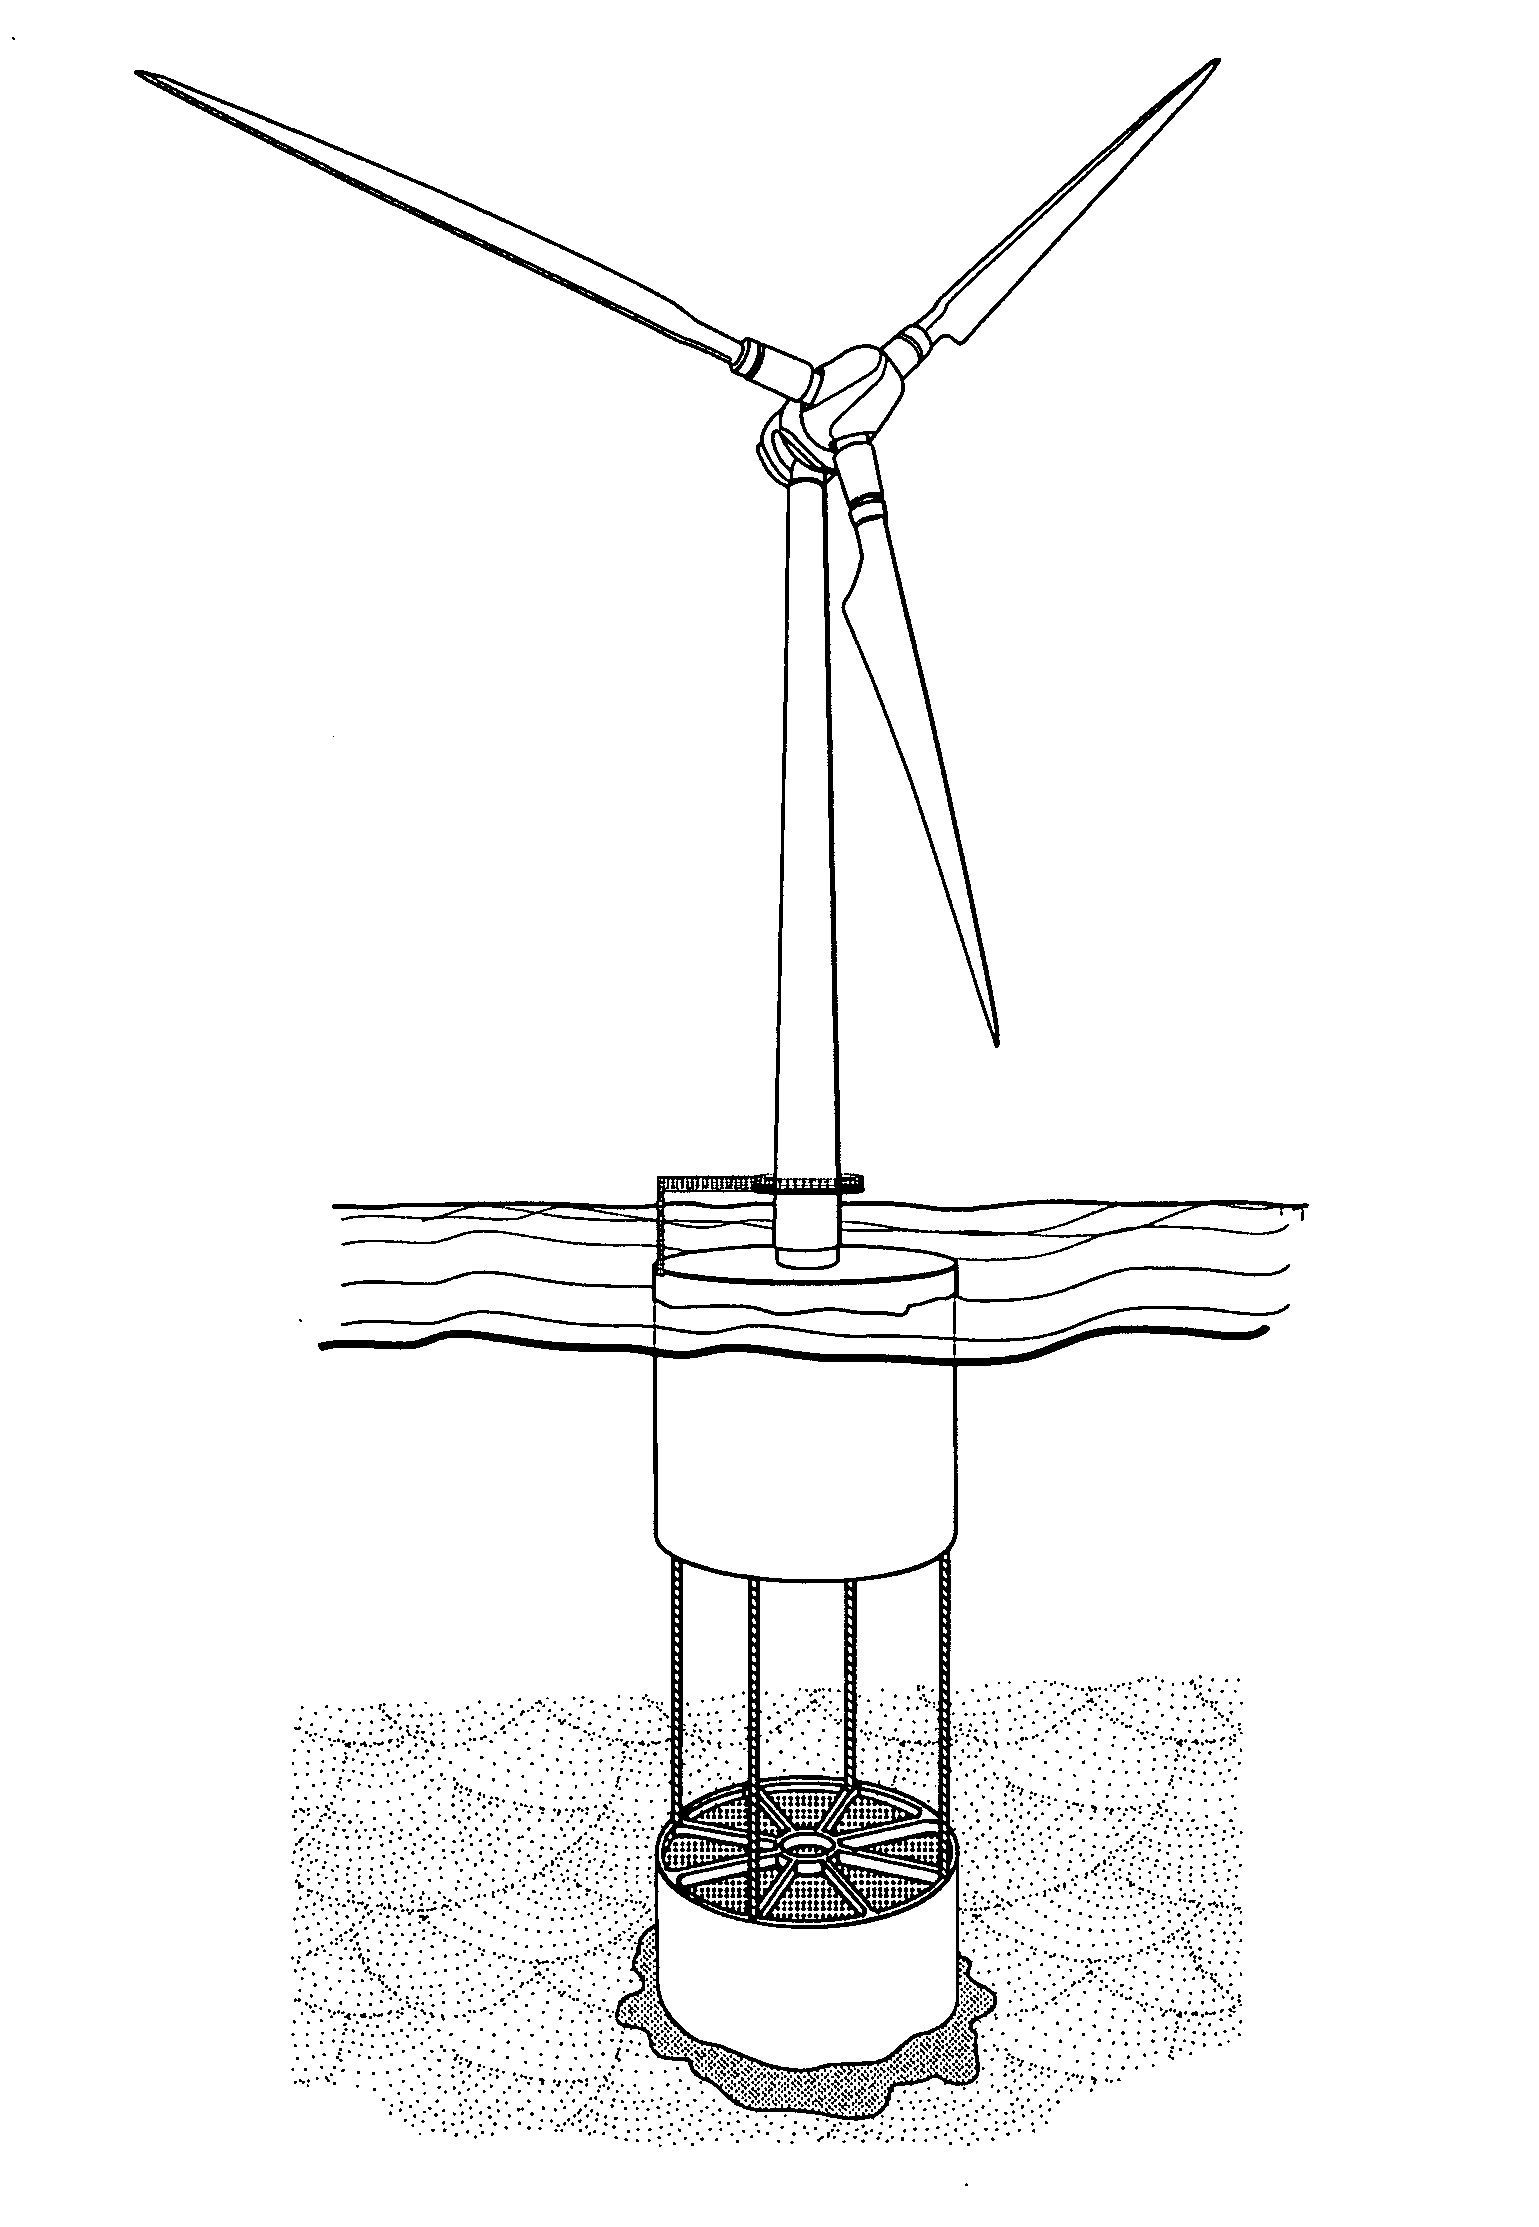 Method of construction, installation, and deployment of an offshore wind turbine on a concrete tension leg platform